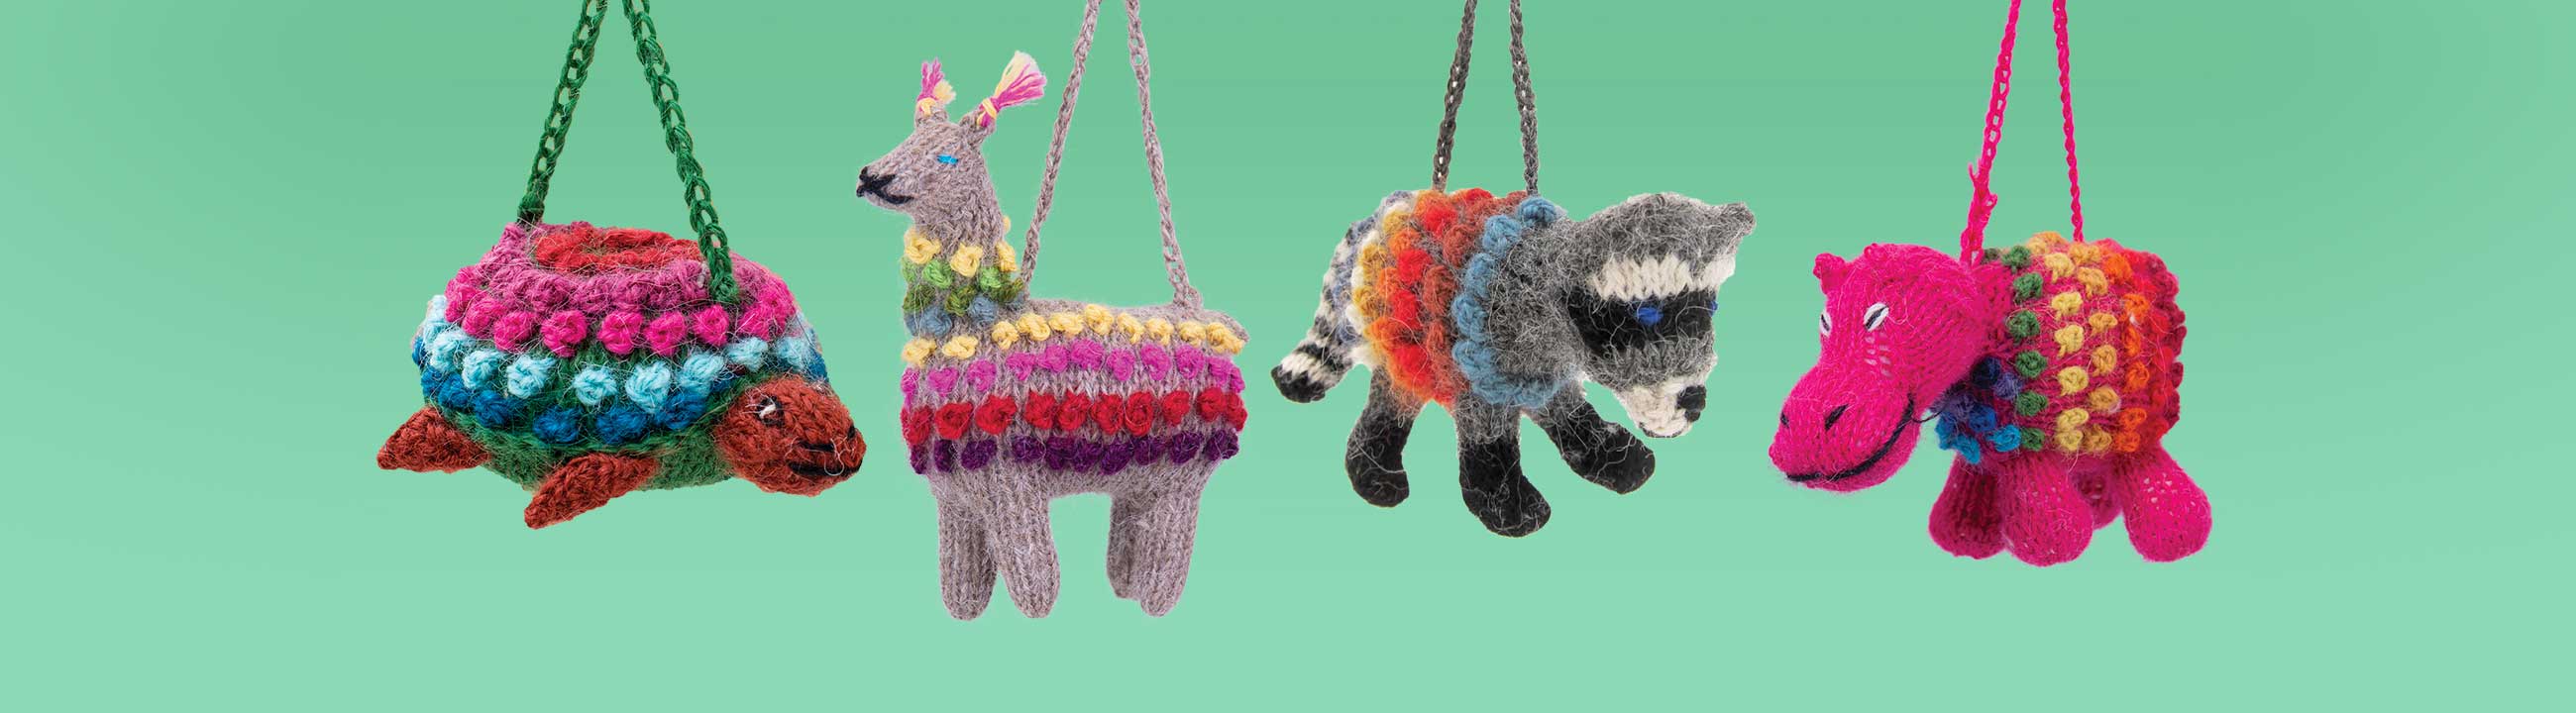 Alpaca knitted ornaments